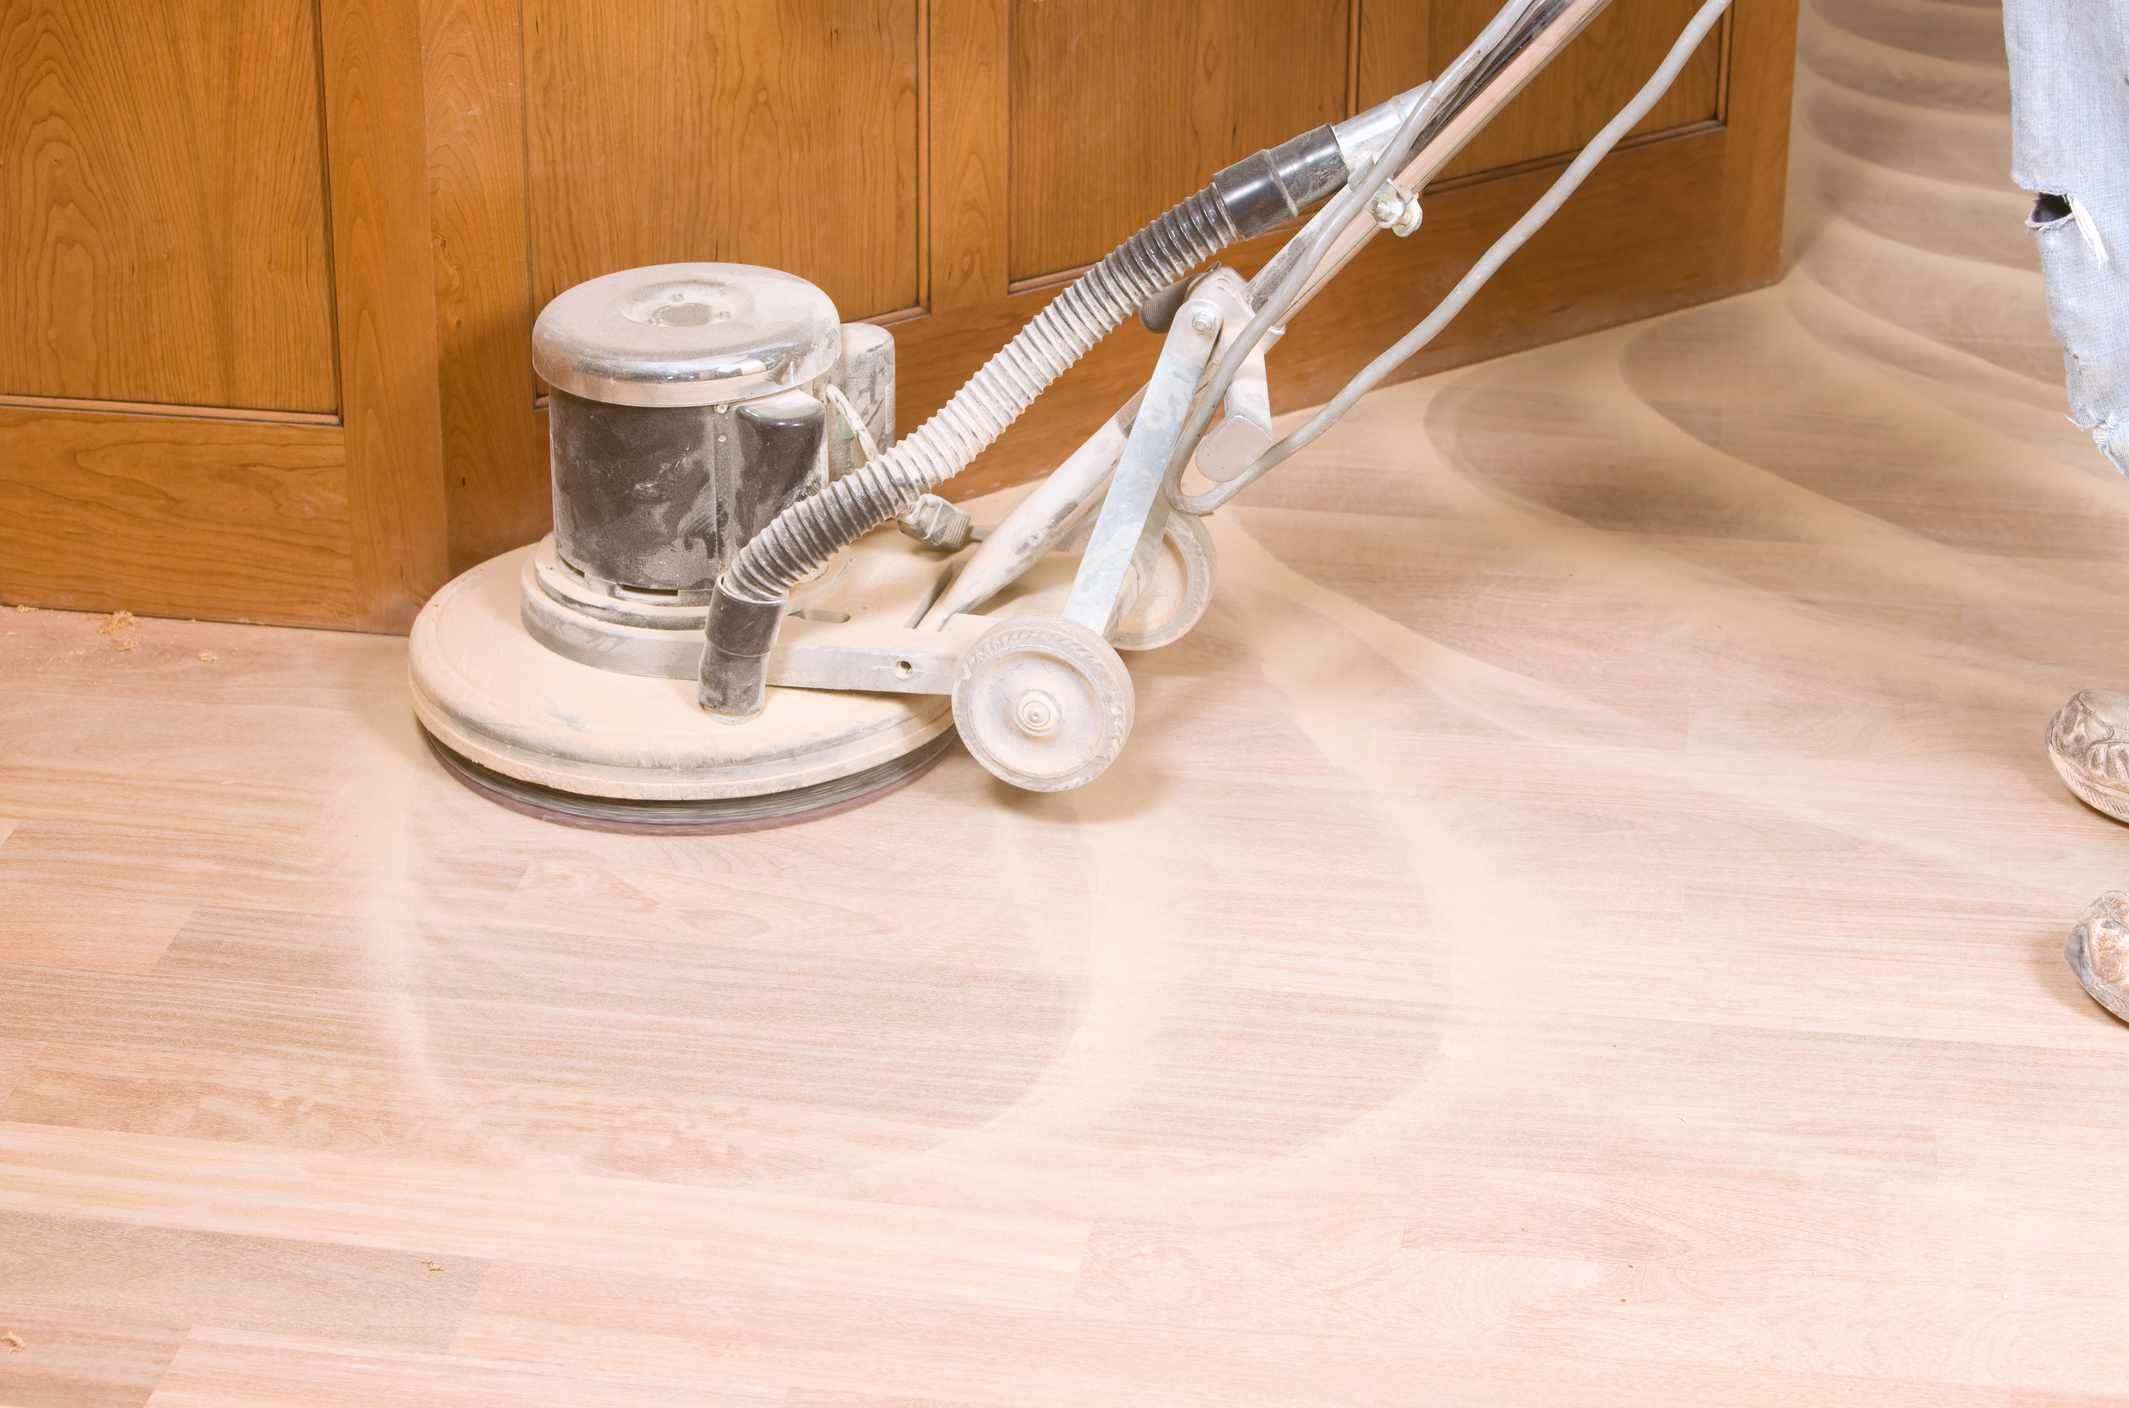 average cost of sanding hardwood floors of how to sand hardwood floors throughout gettyimages 183768766 587b01a45f9b584db3a5315f